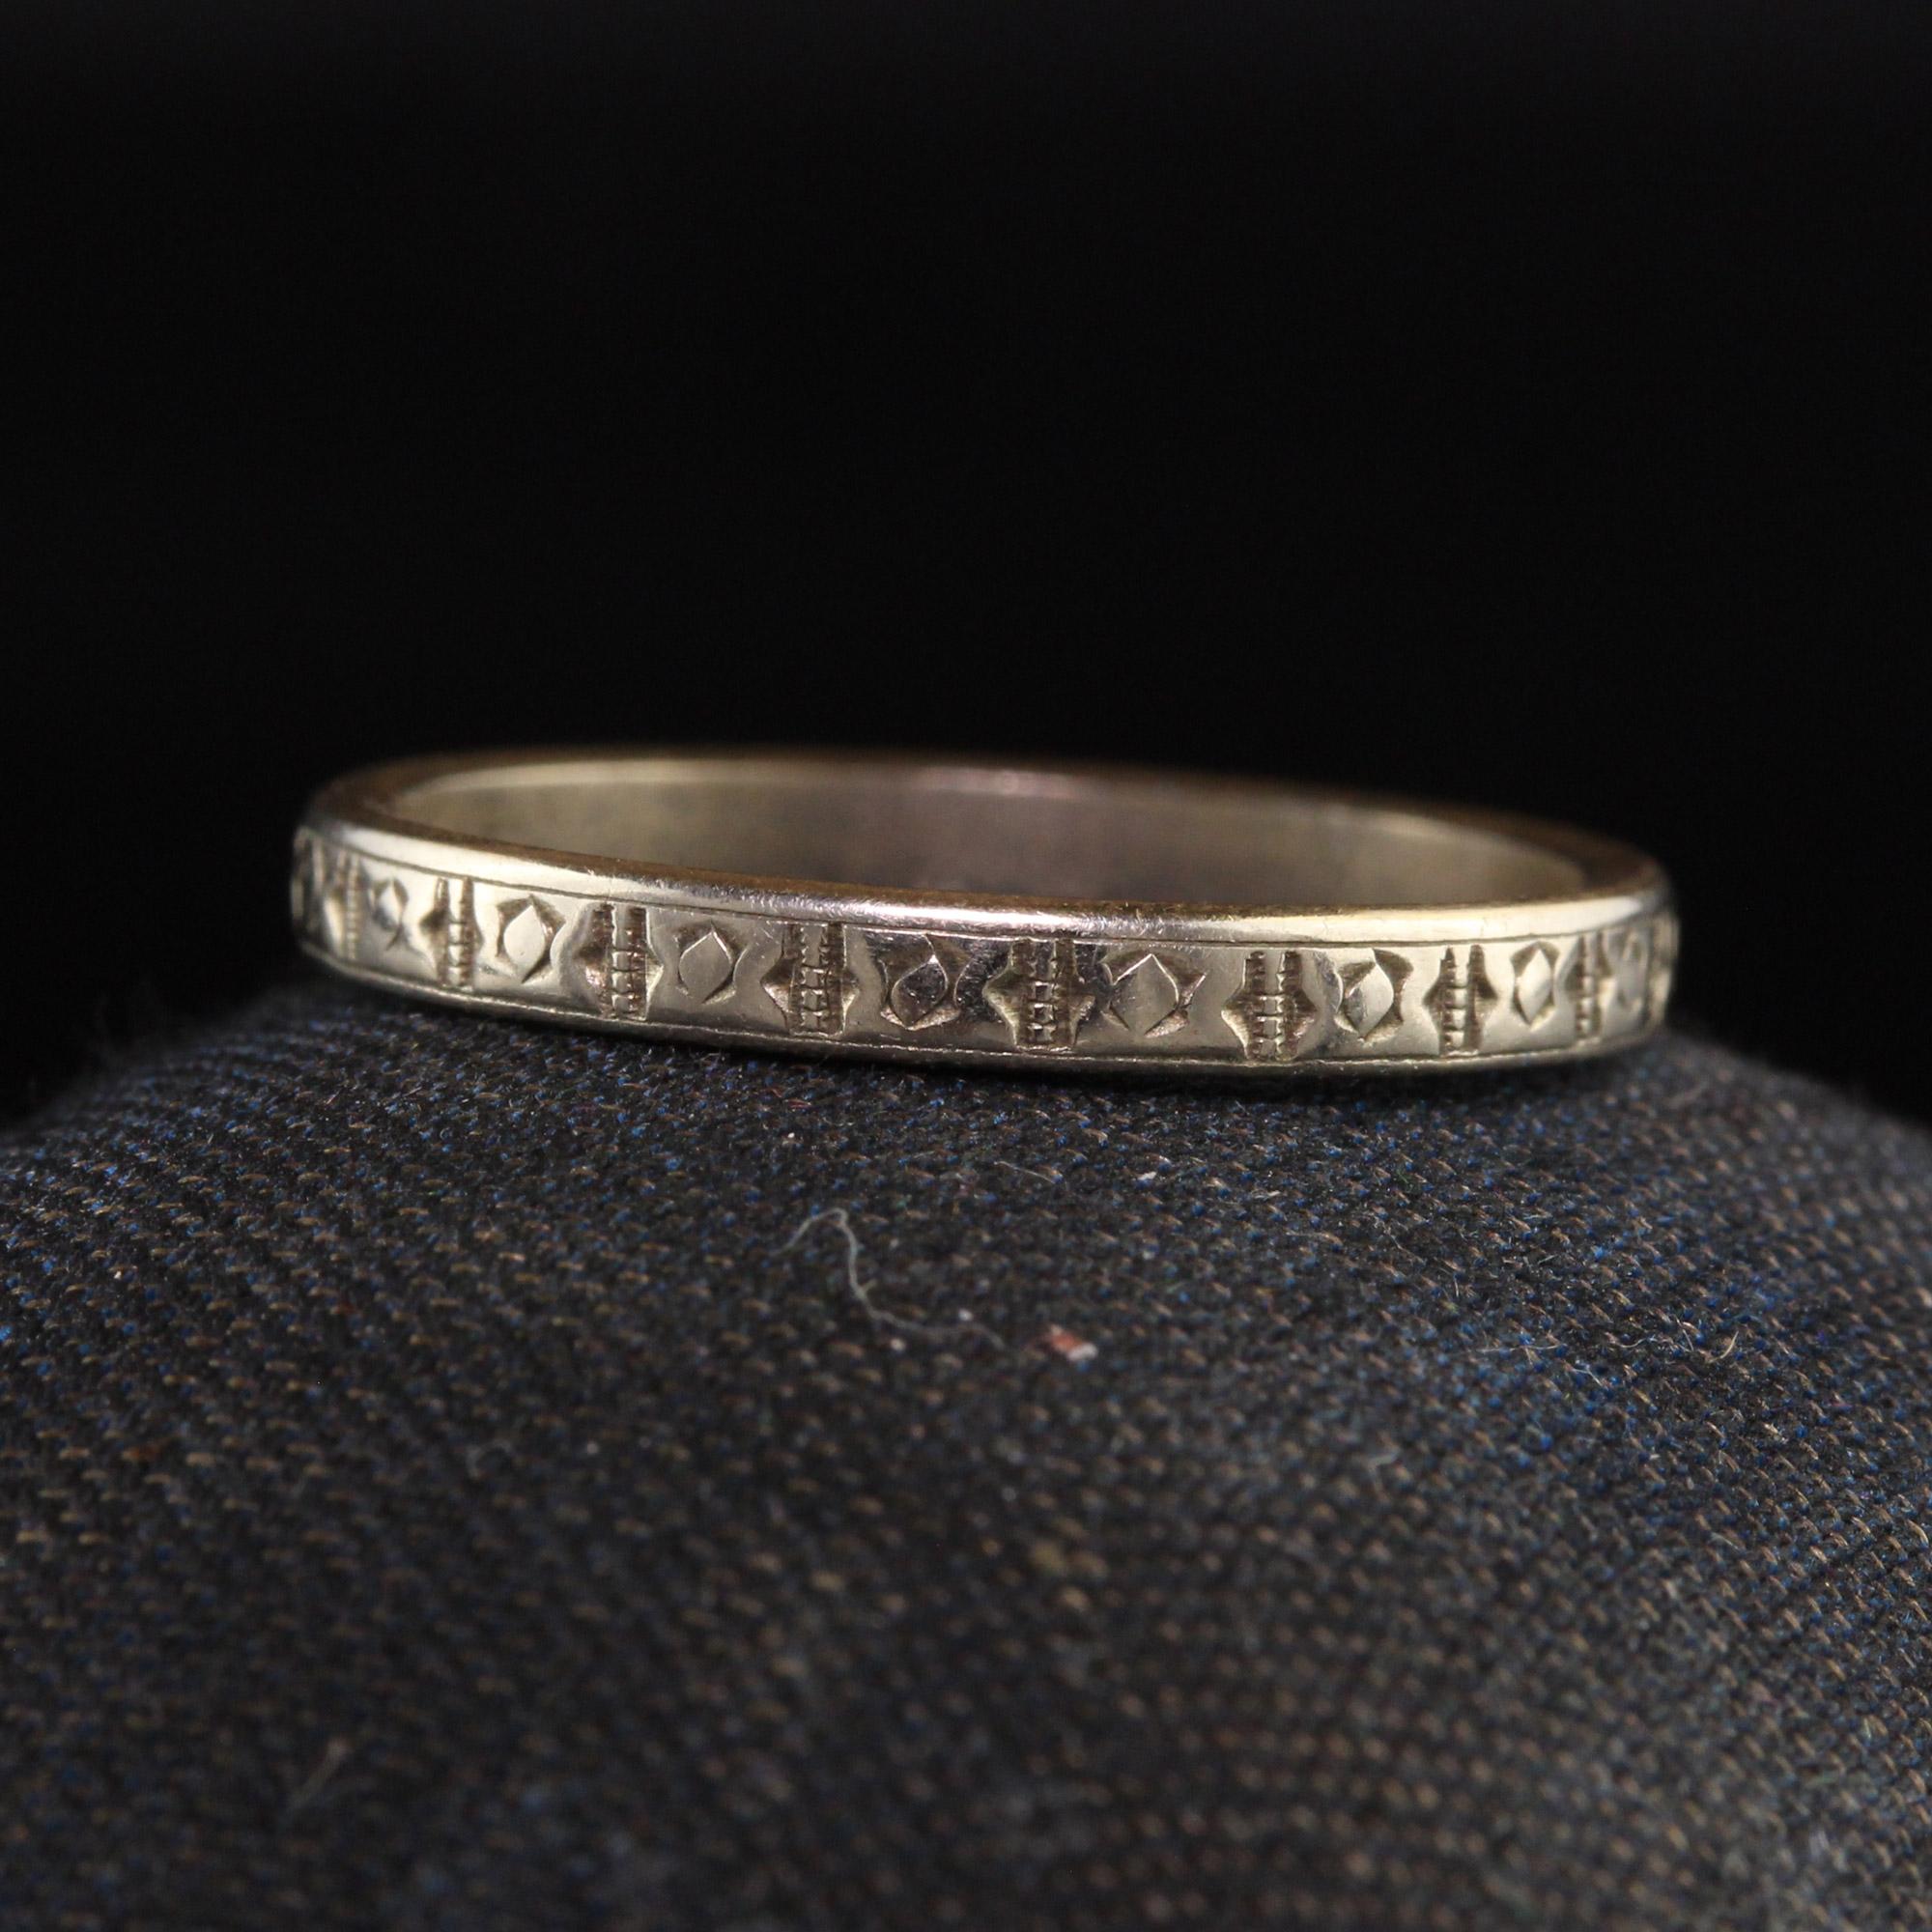 Beautiful Antique Art Deco 14K Yellow and White Gold Engraved Wedding Band. This beautiful band is crafted in 14k yellow gold and white gold top. It is beautifully engraved with a pattern around the entire band.

Item #R1133

Metal: 14K Yellow and